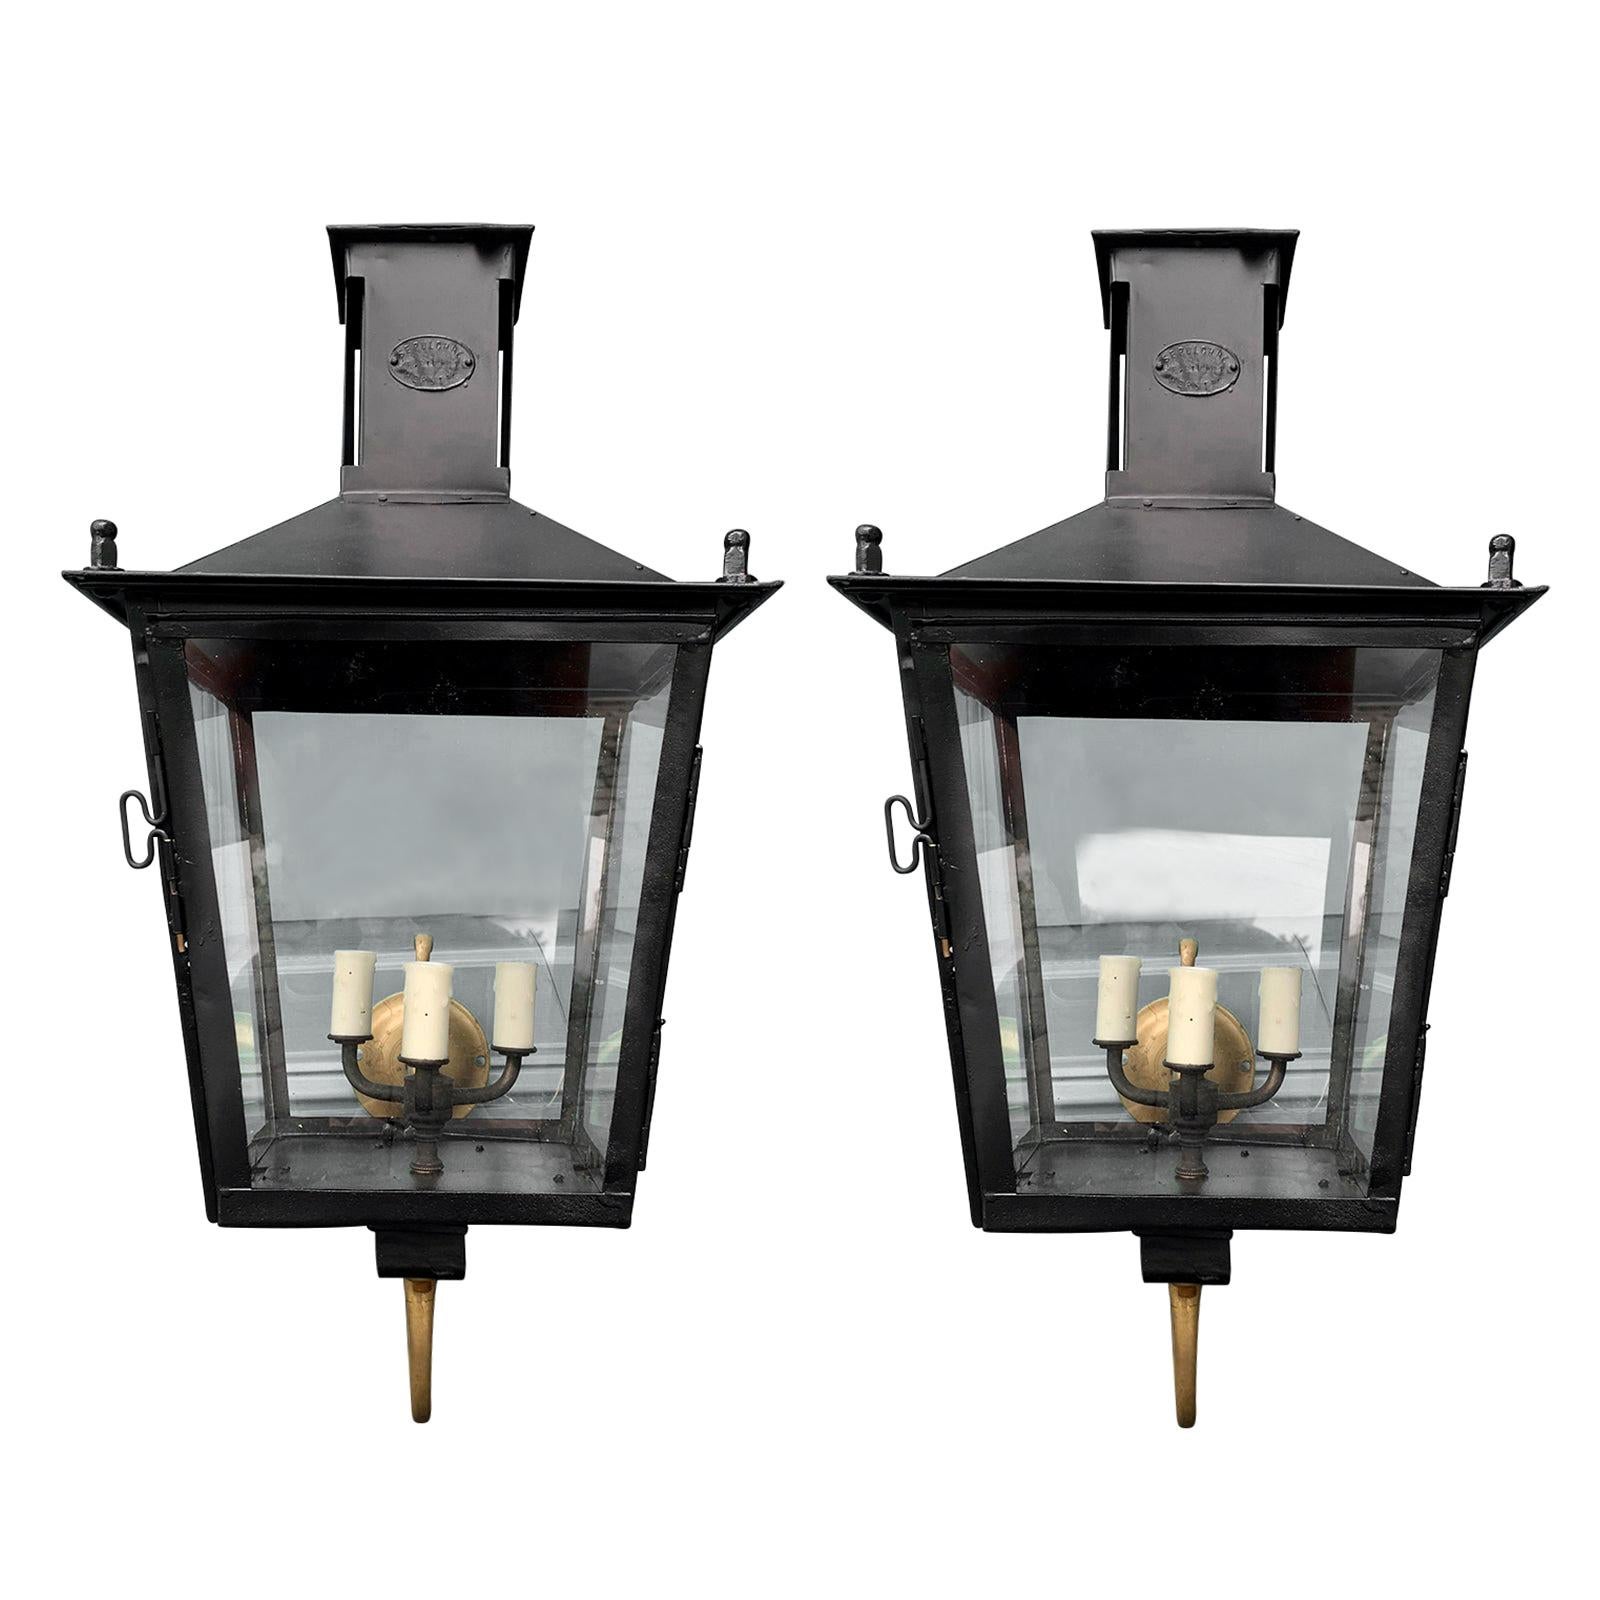 Pair of 19th Century Iron Wall-Mount Lanterns by Louis Sepulchre, Labeled For Sale